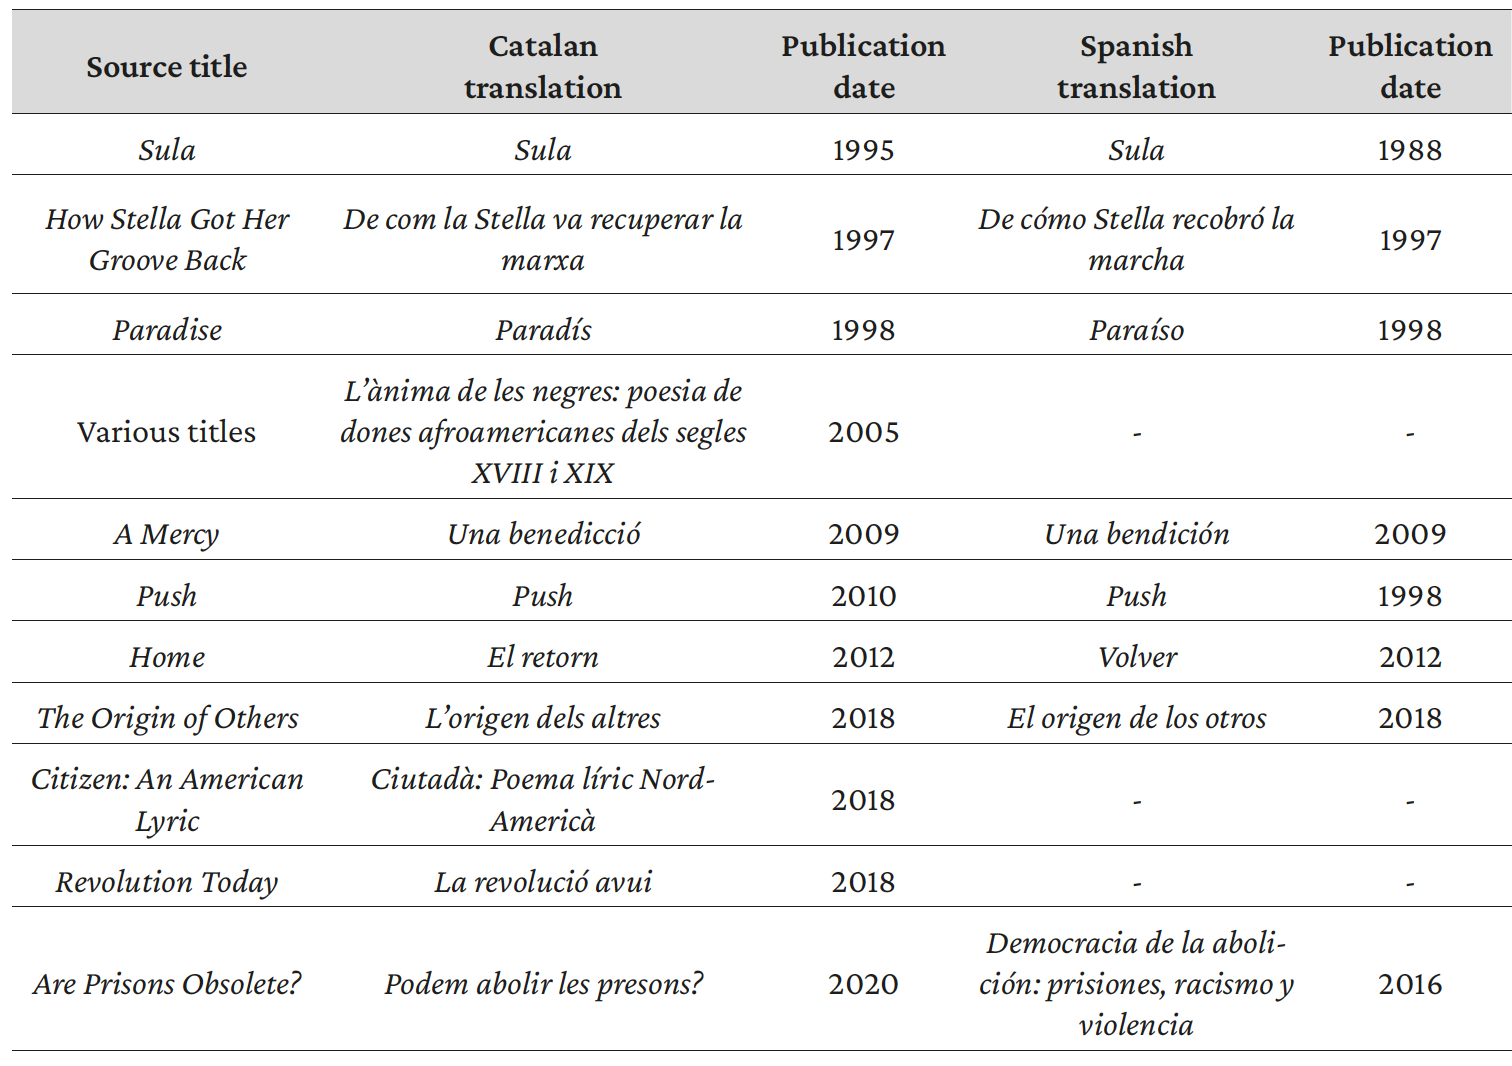 Table 4. Overview of the publication dates of the first editions of texts translated into Catalan and/or Spanish